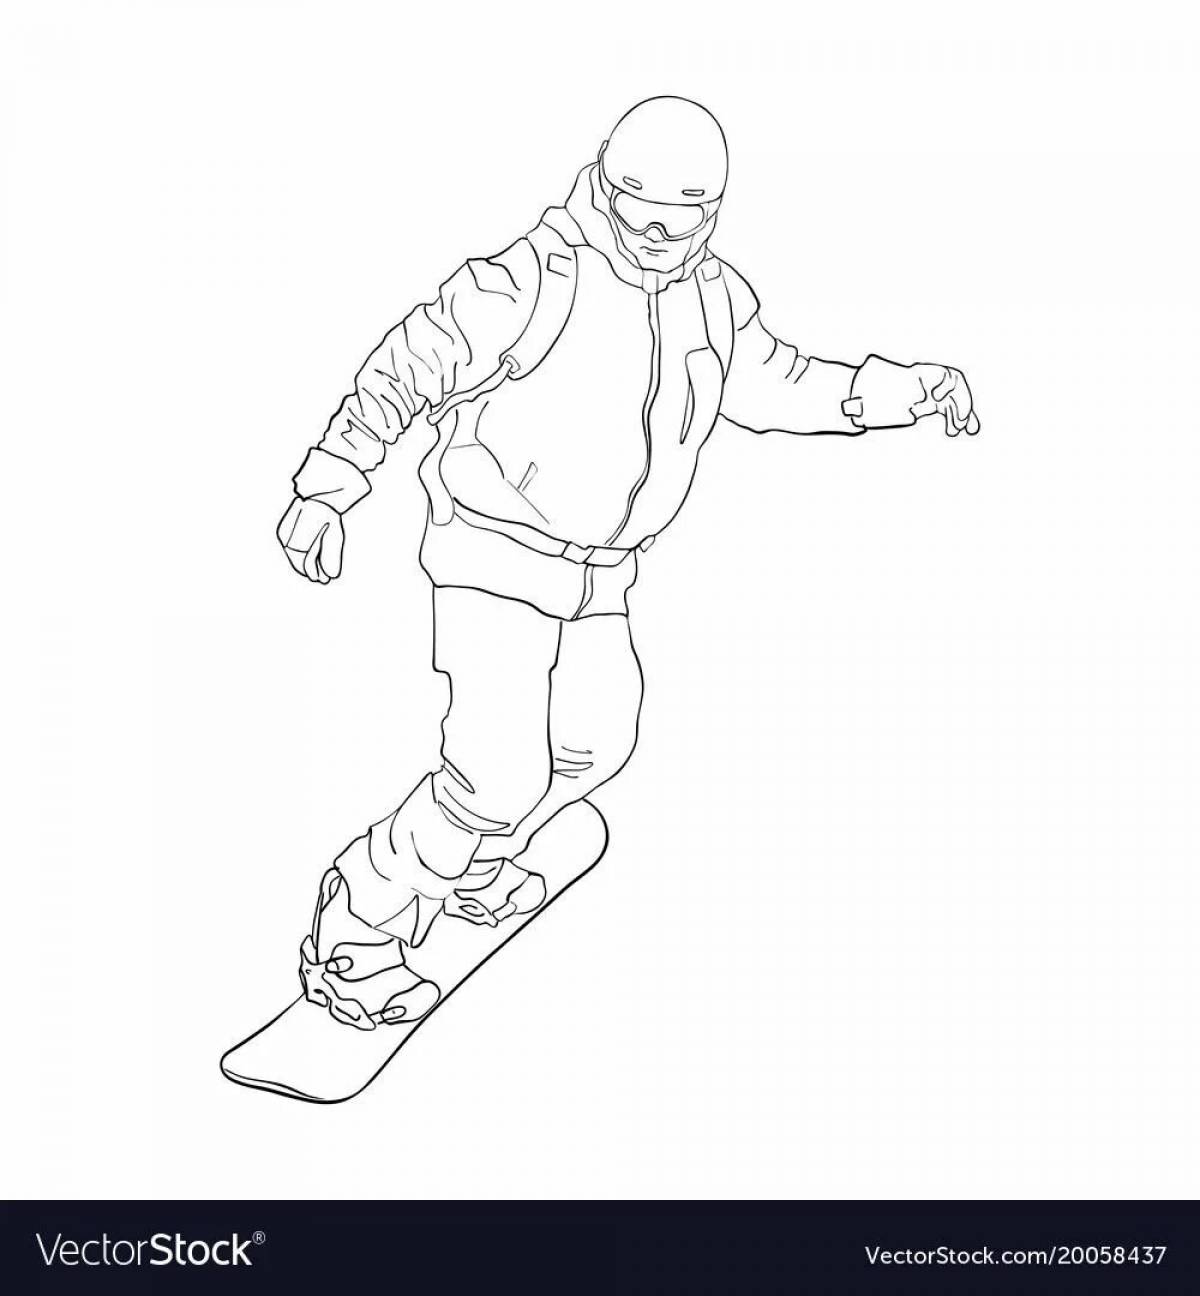 Snowboarder coloring book for kids